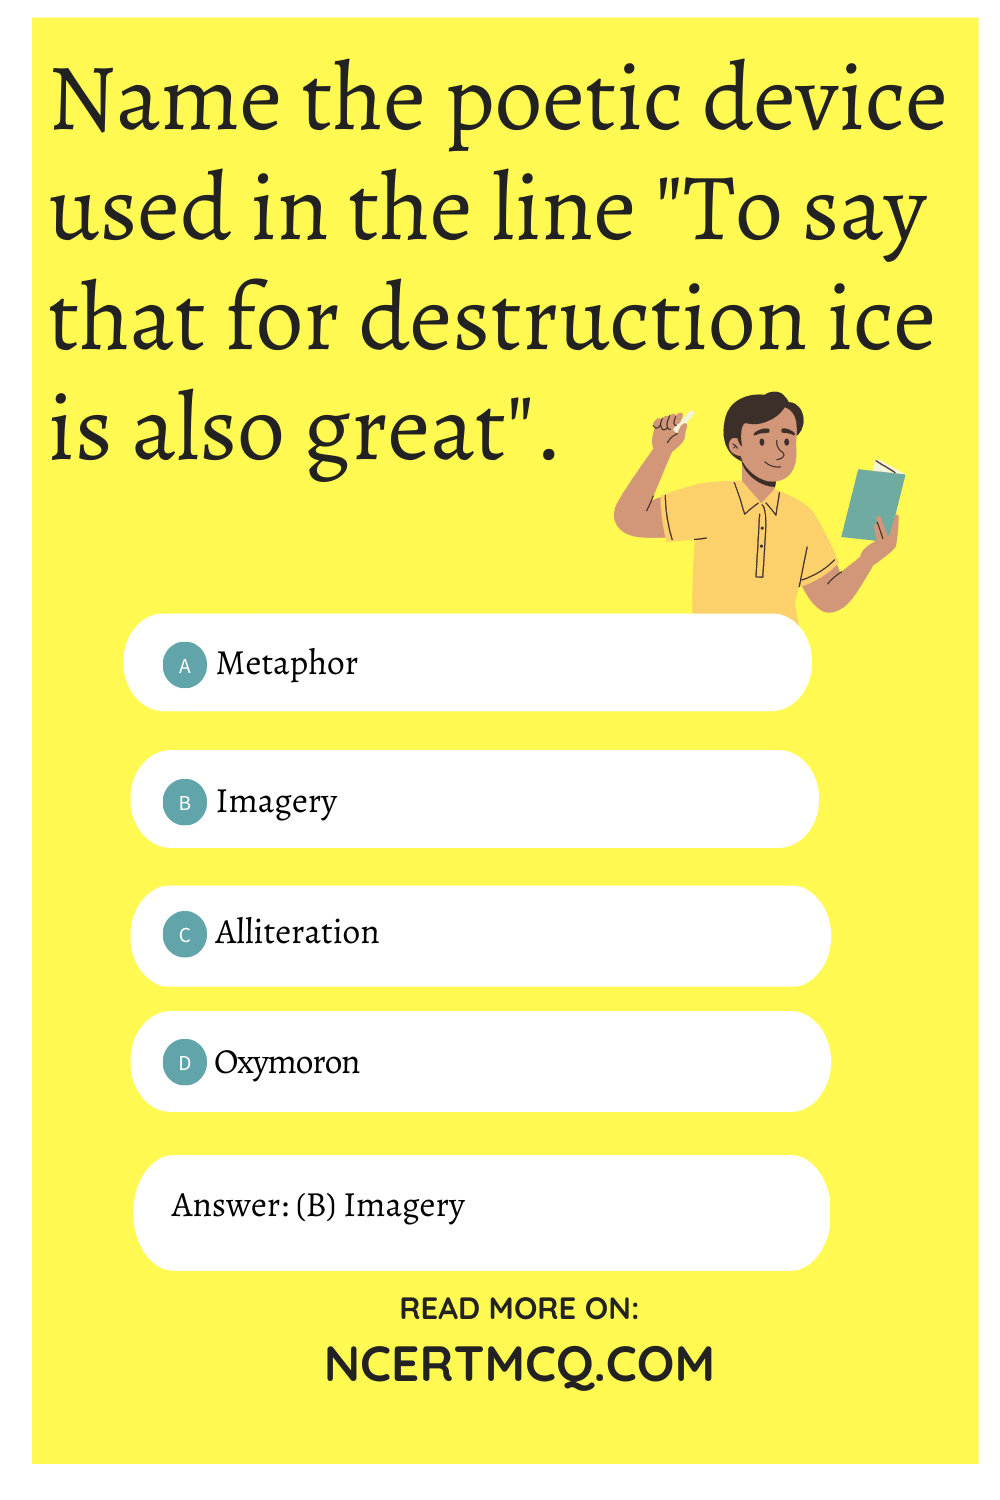 Name the poetic device used in the line "To say that for destruction ice is also great".